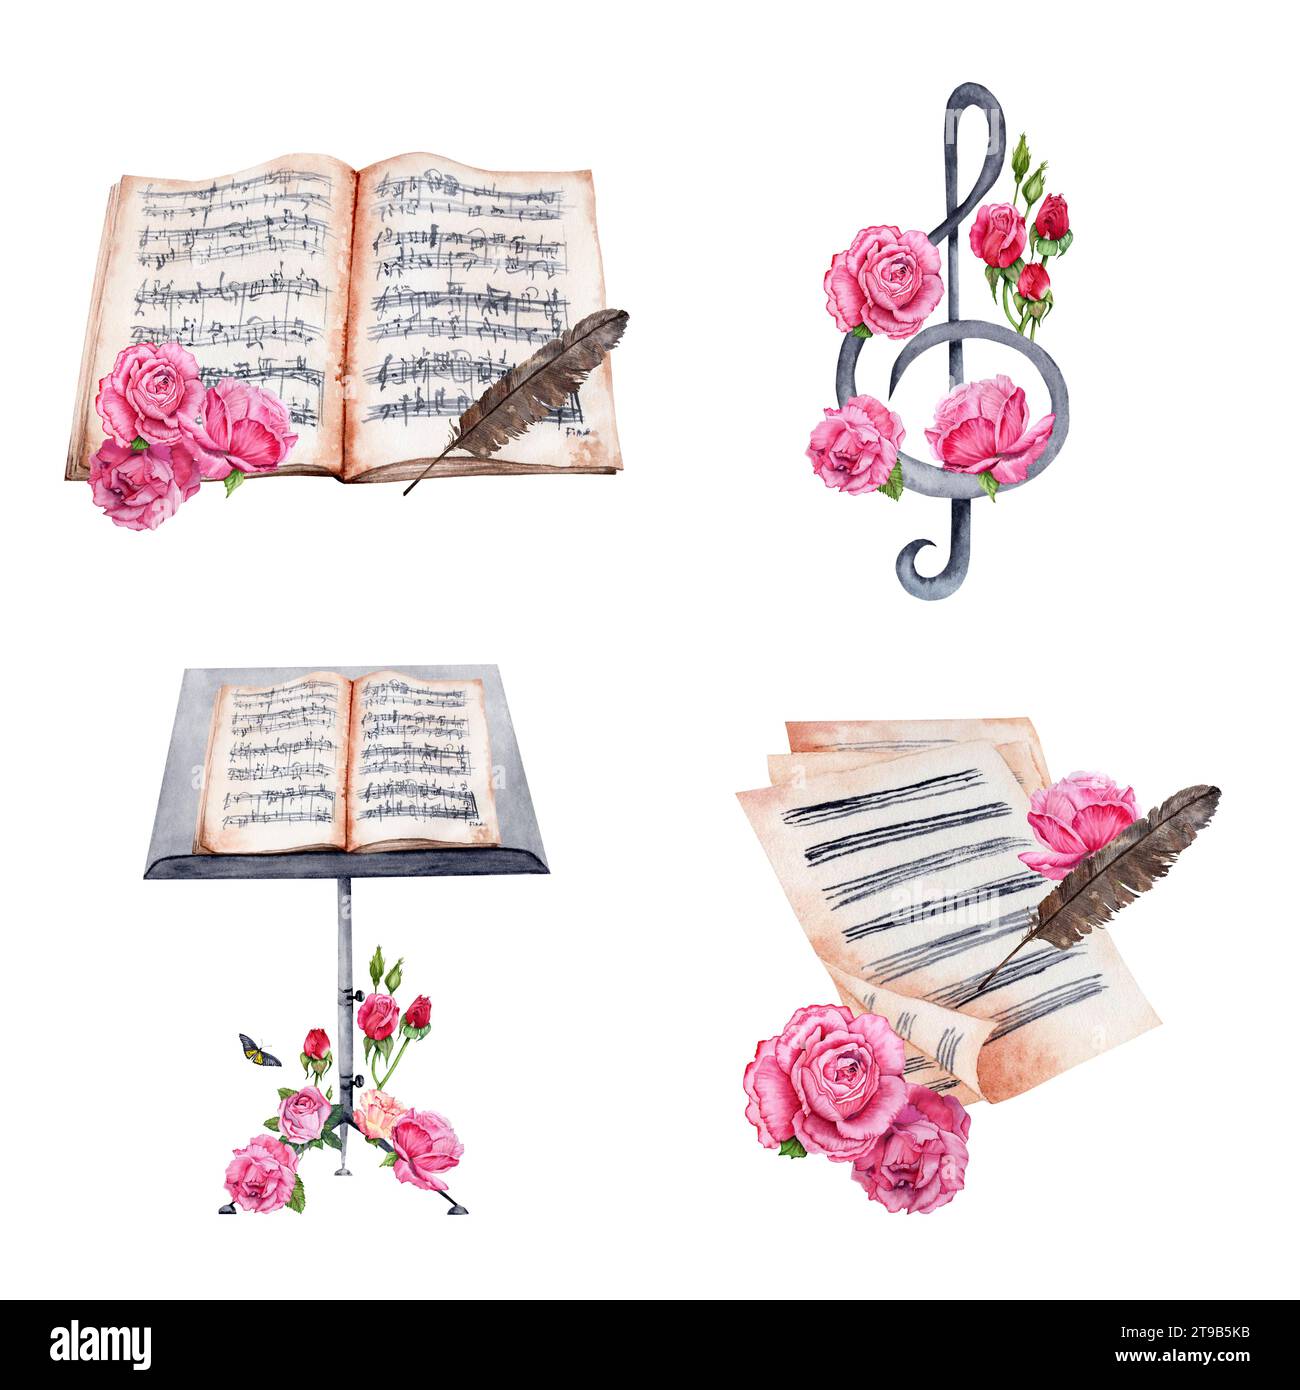 Violin, string instrument, treble clef, music stand, sheet music, rose flowers. Collection of classical music hand drawn design compositions. Stock Photo